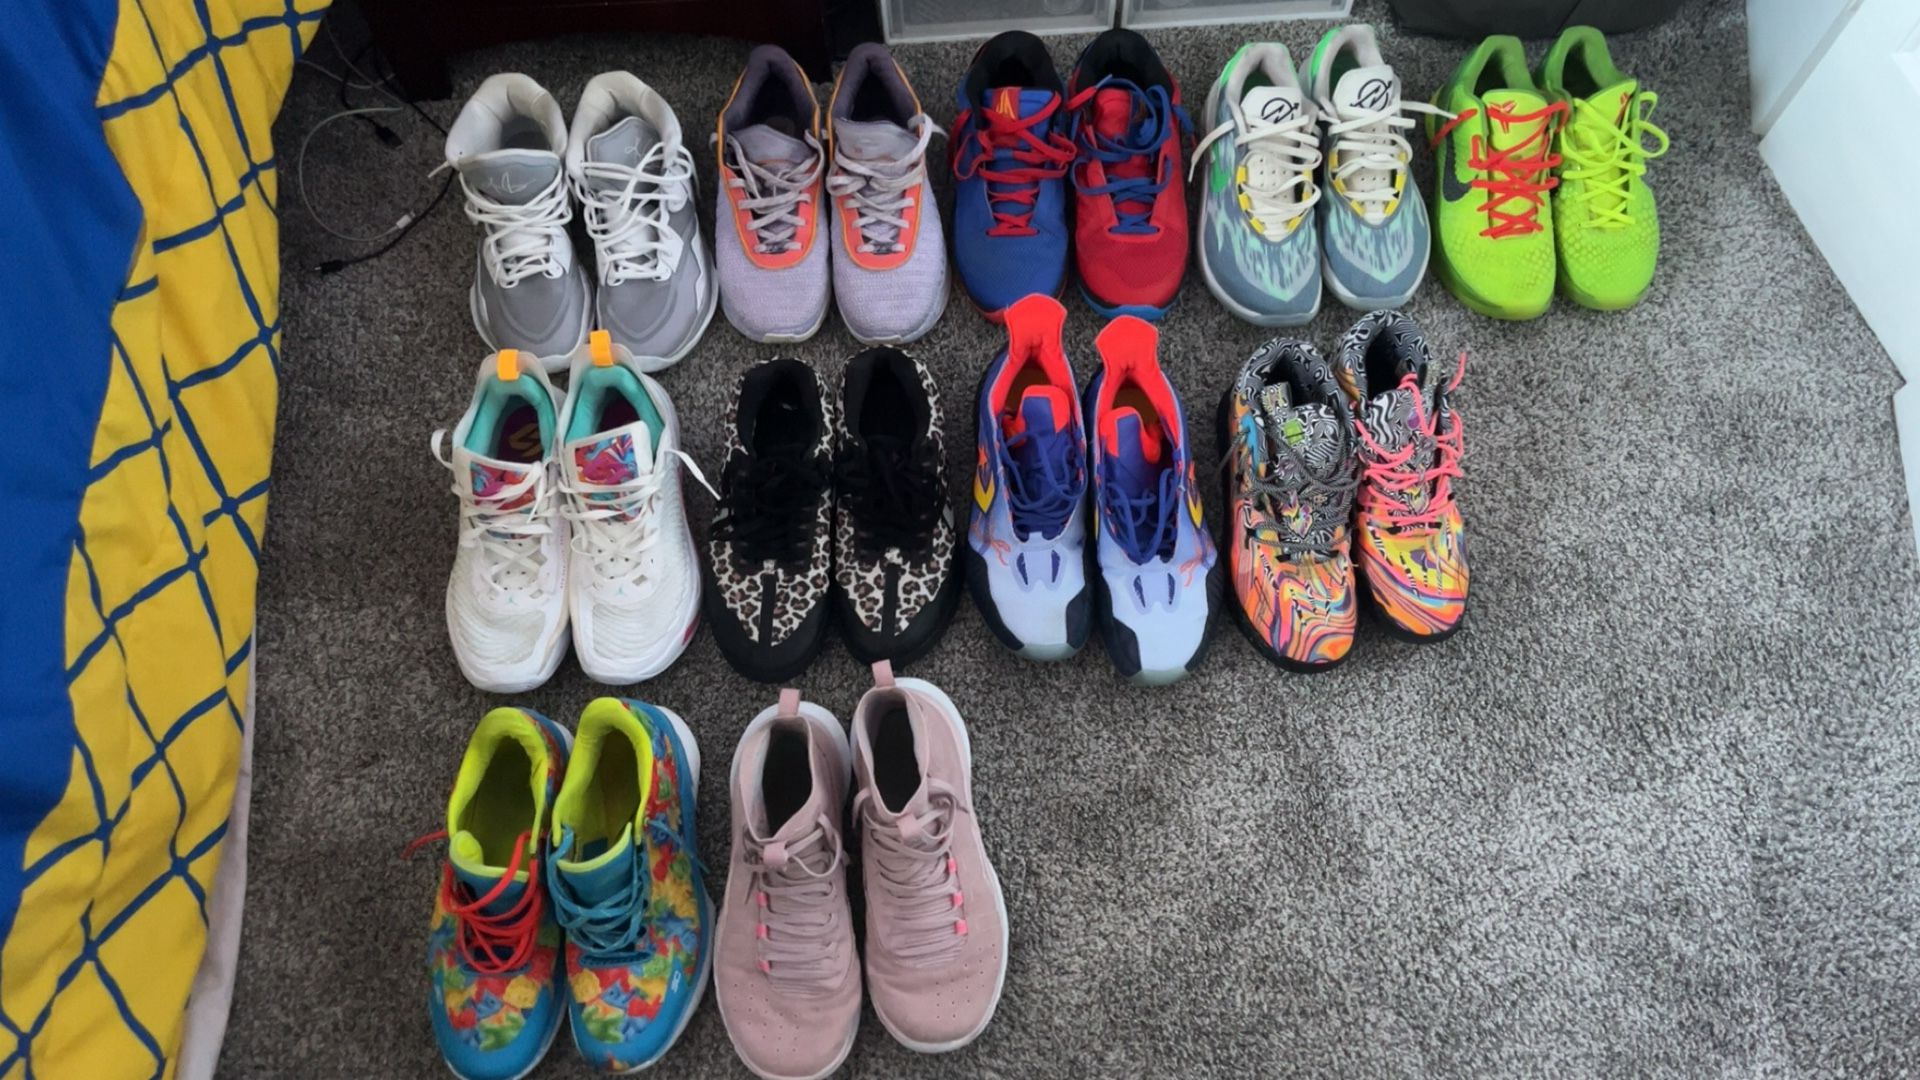 Basketball Shoes Kobe’s,Kyries, Lebrons, Curry’s 